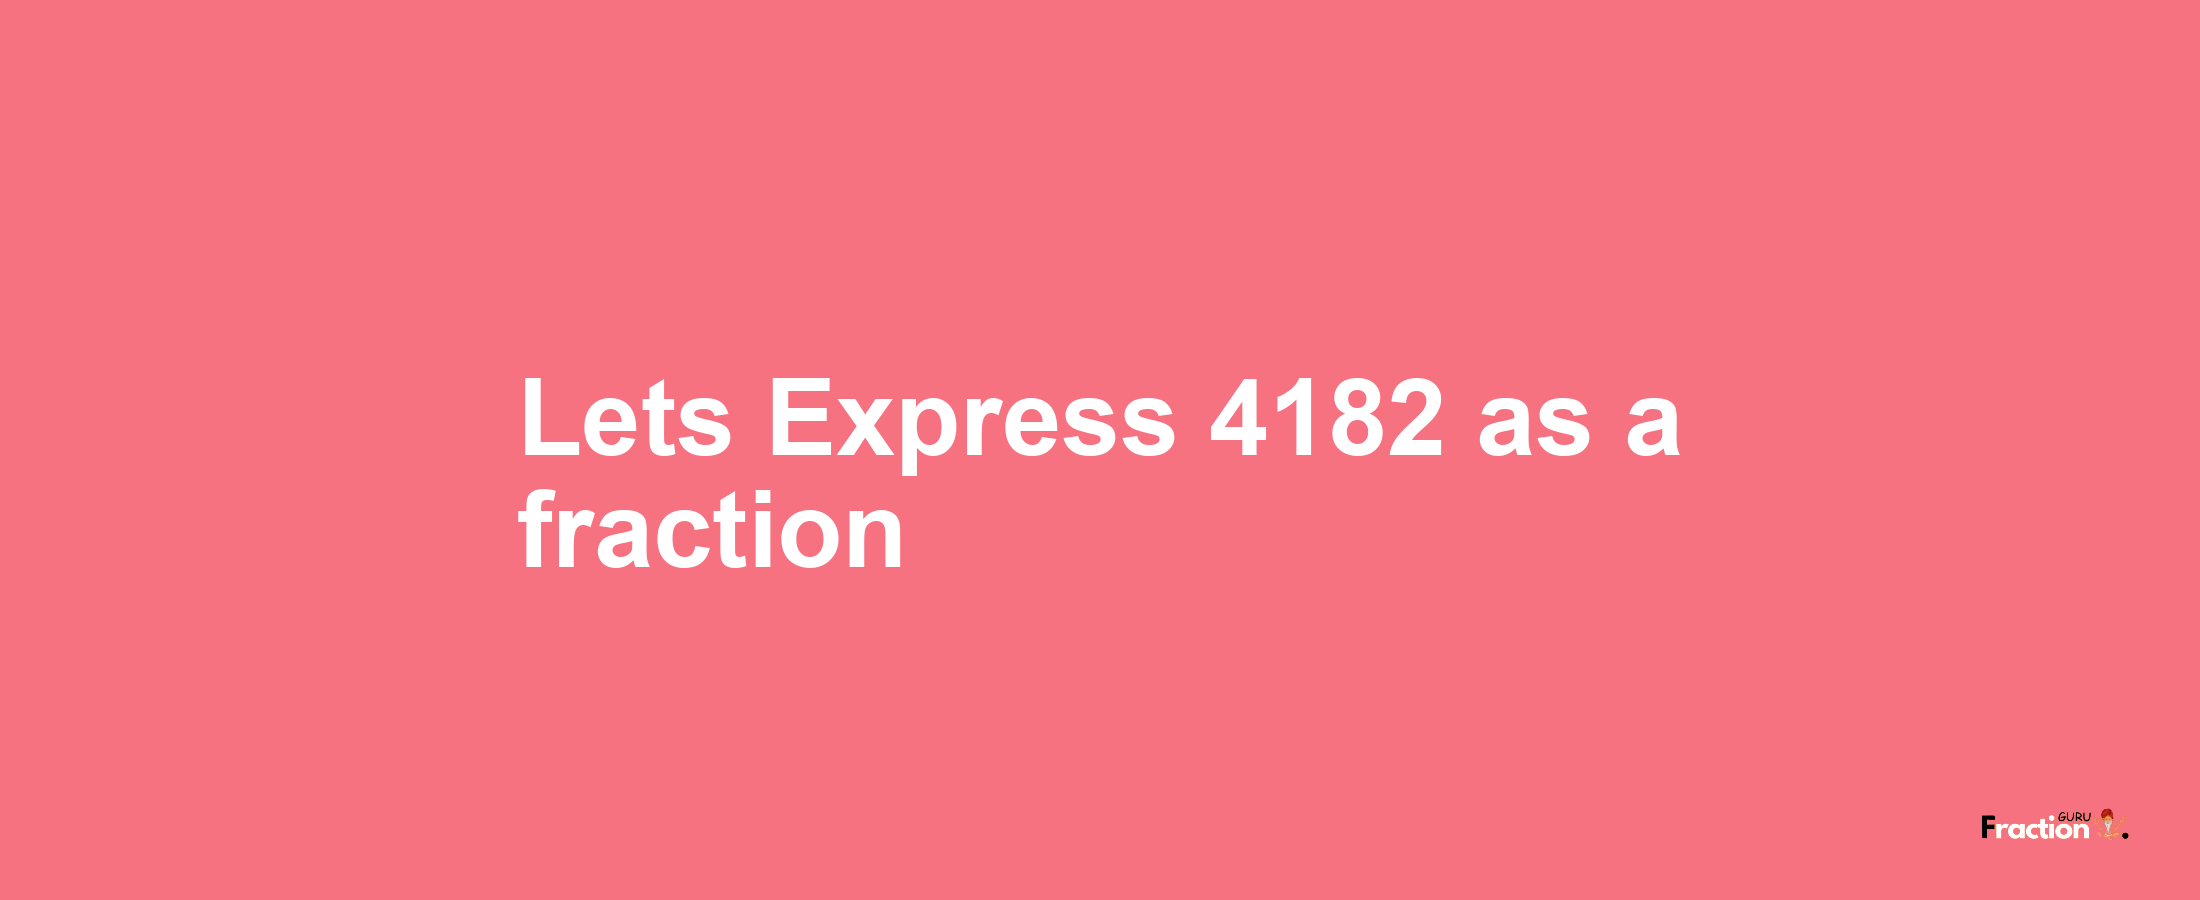 Lets Express 4182 as afraction